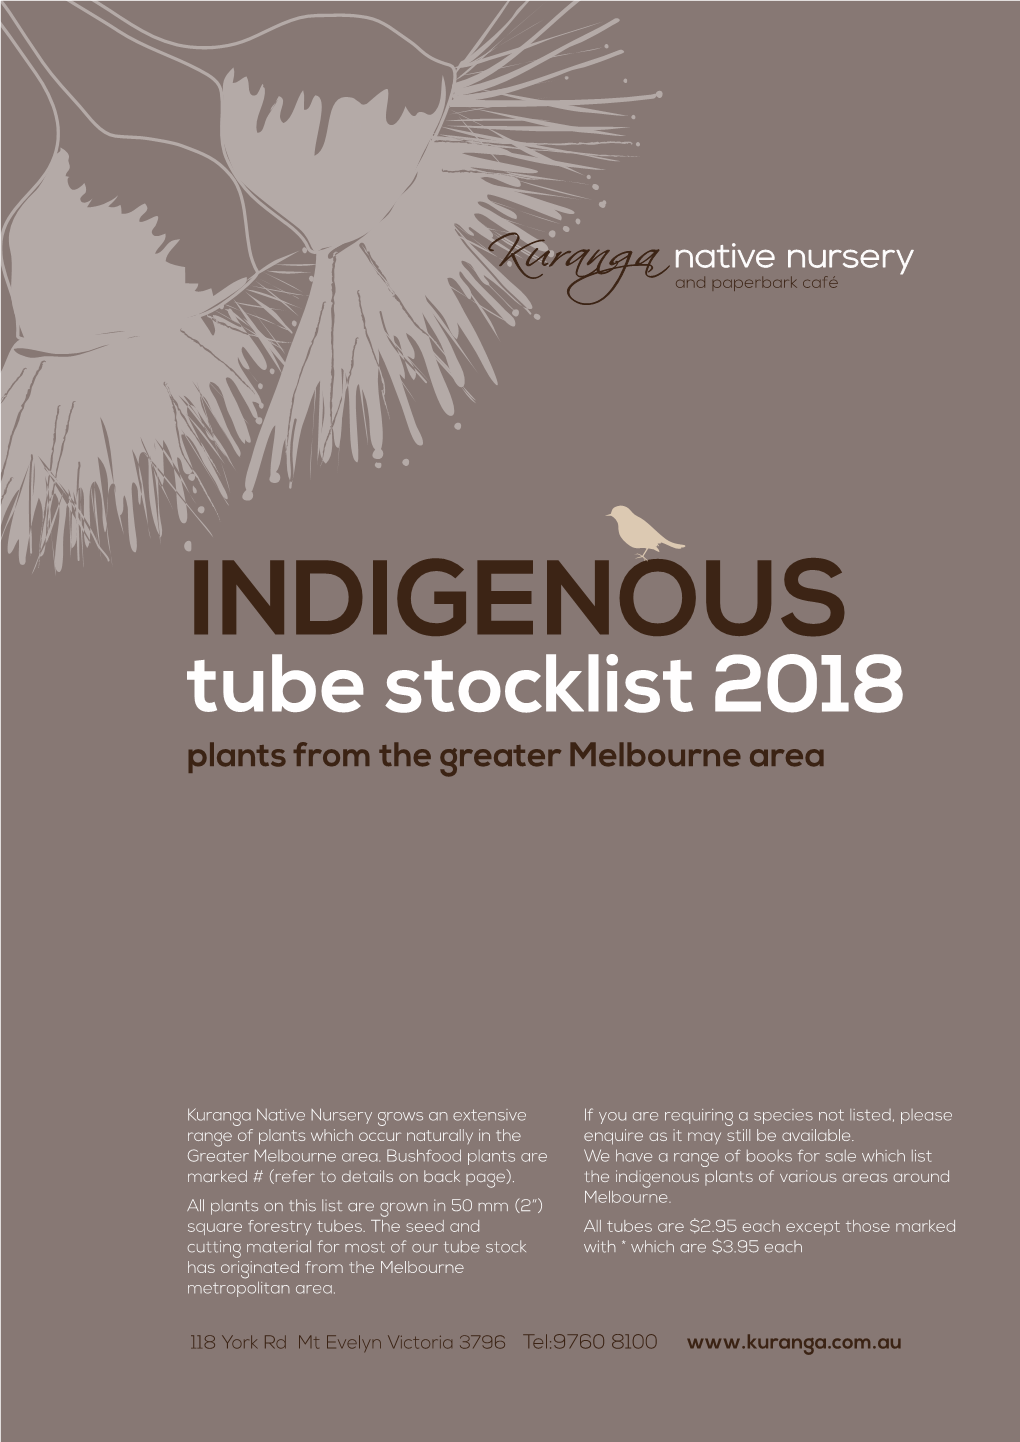 INDIGENOUS Tube Stocklist 2018 Plants from the Greater Melbourne Area